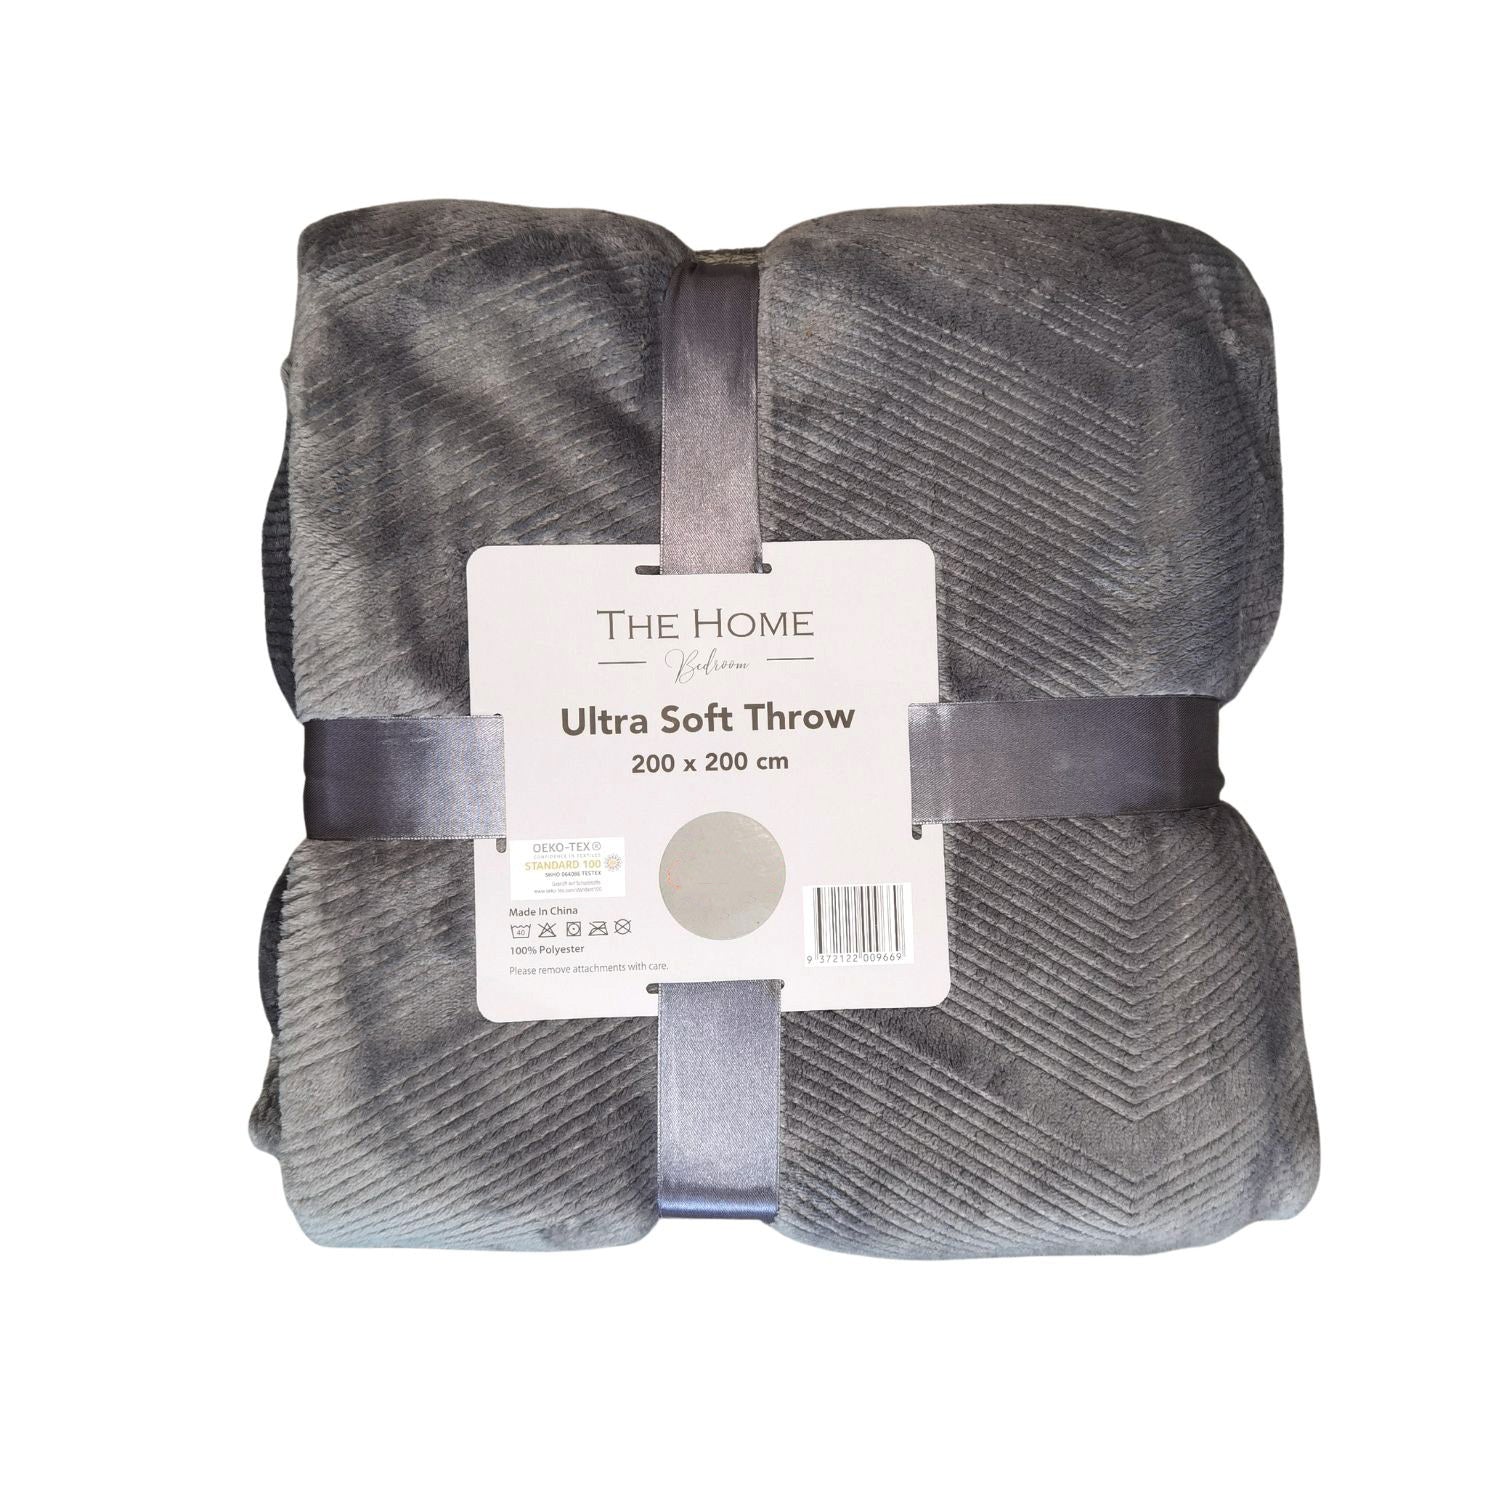 The Home Bedroom Ultra Soft Throw - Grey 1 Shaws Department Stores